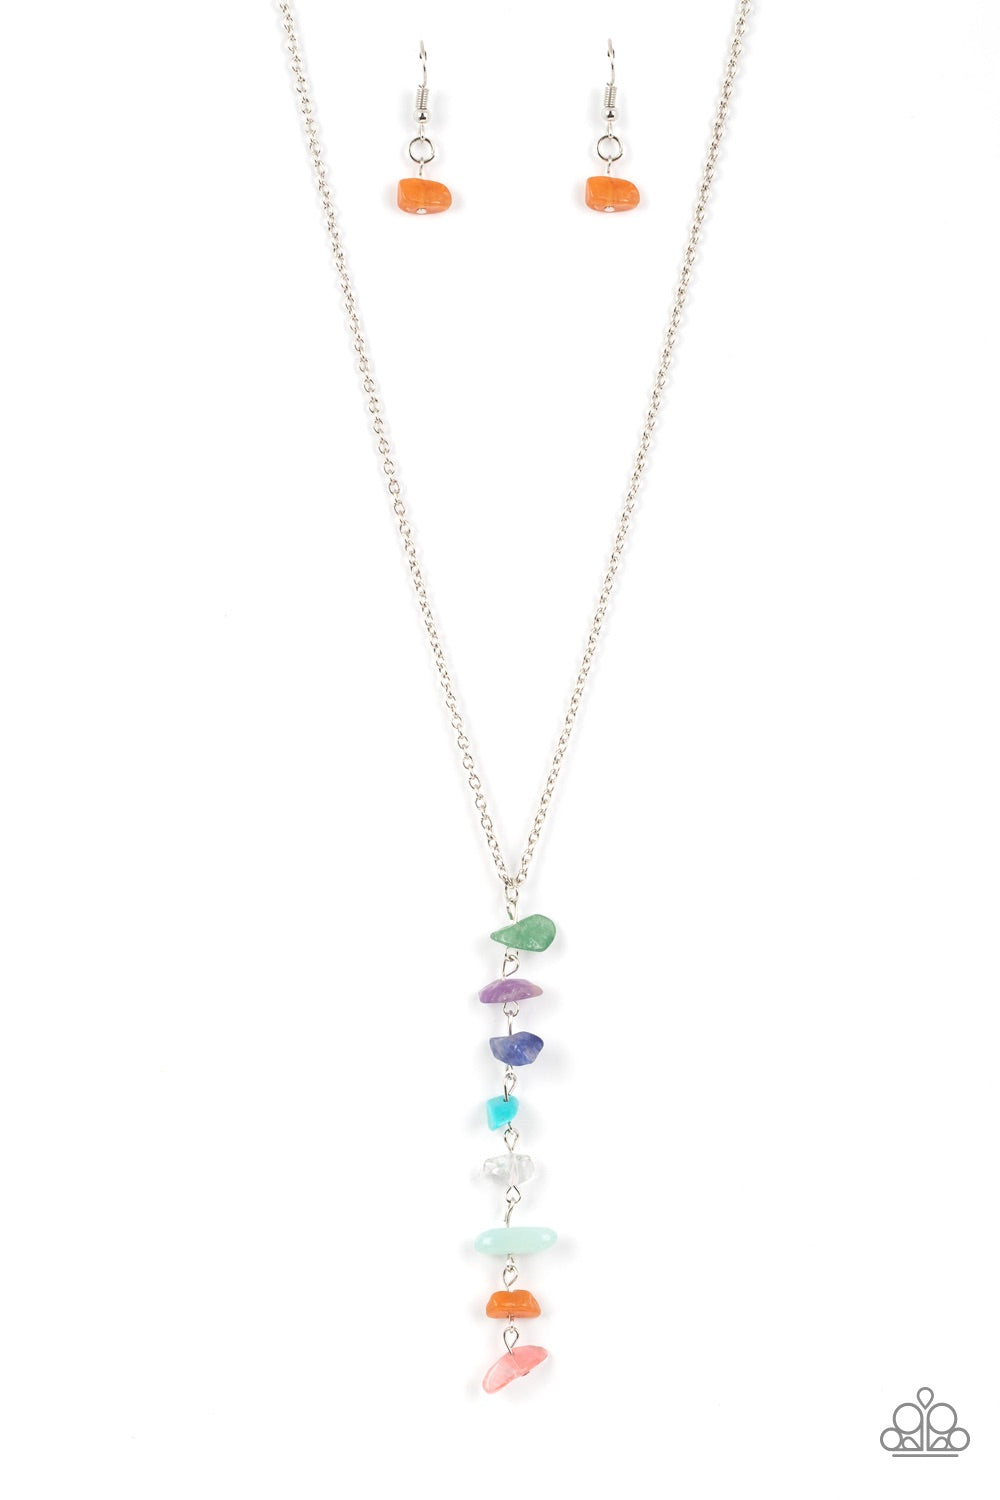 Tranquil Tidings - Multi Necklace - A Finishing Touch Jewelry